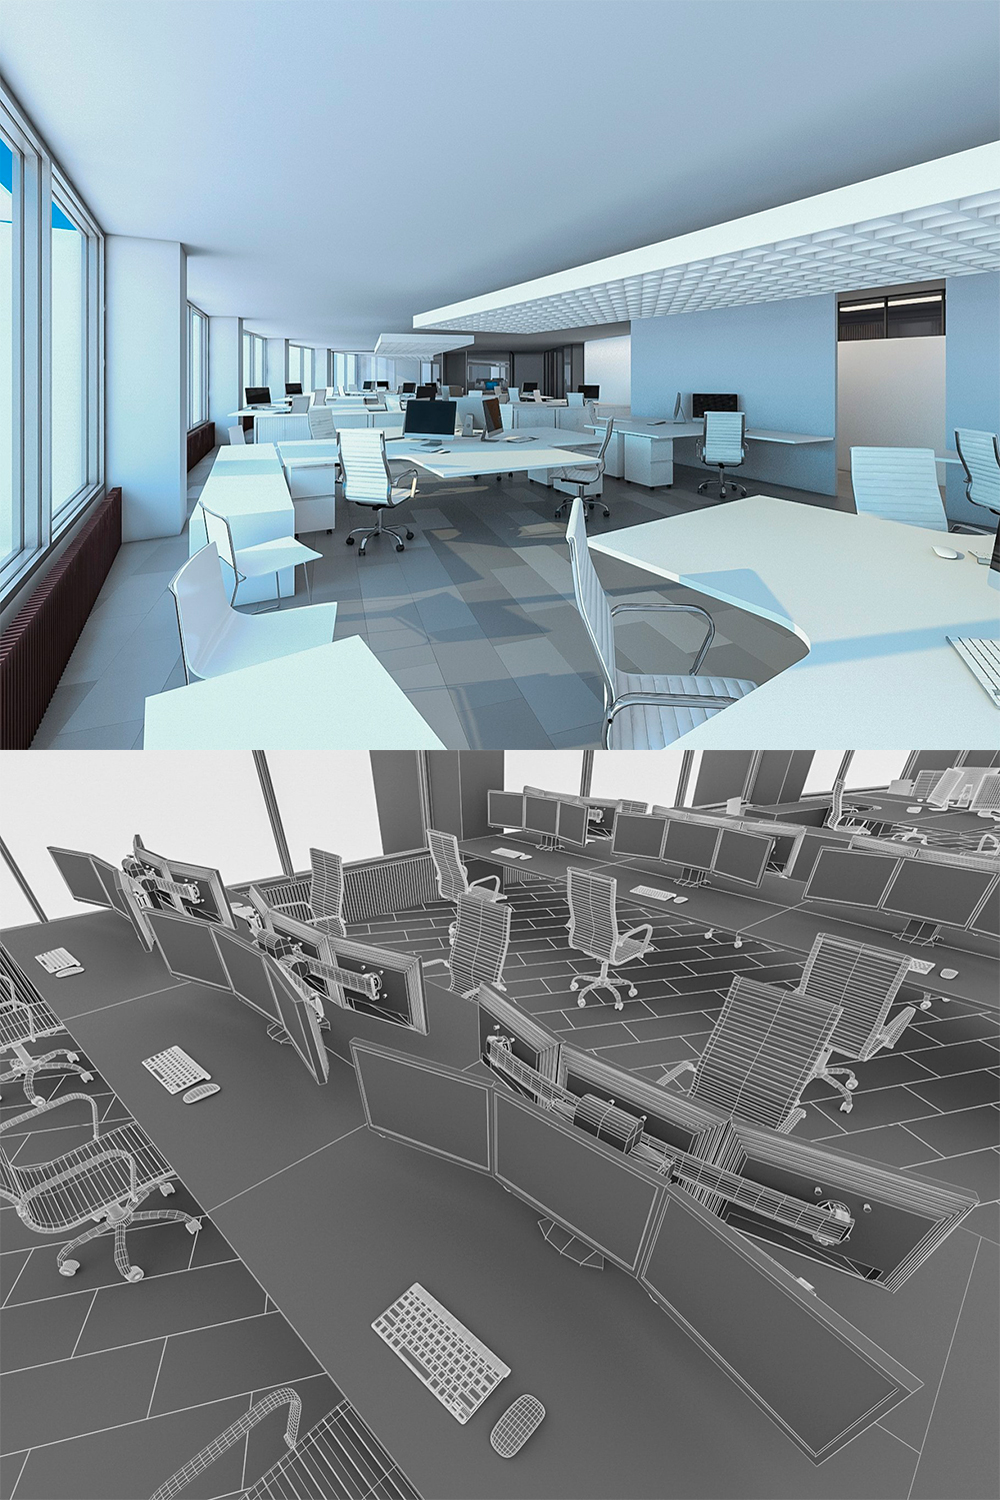 Rendering of a wonderful 3d model of an office interior